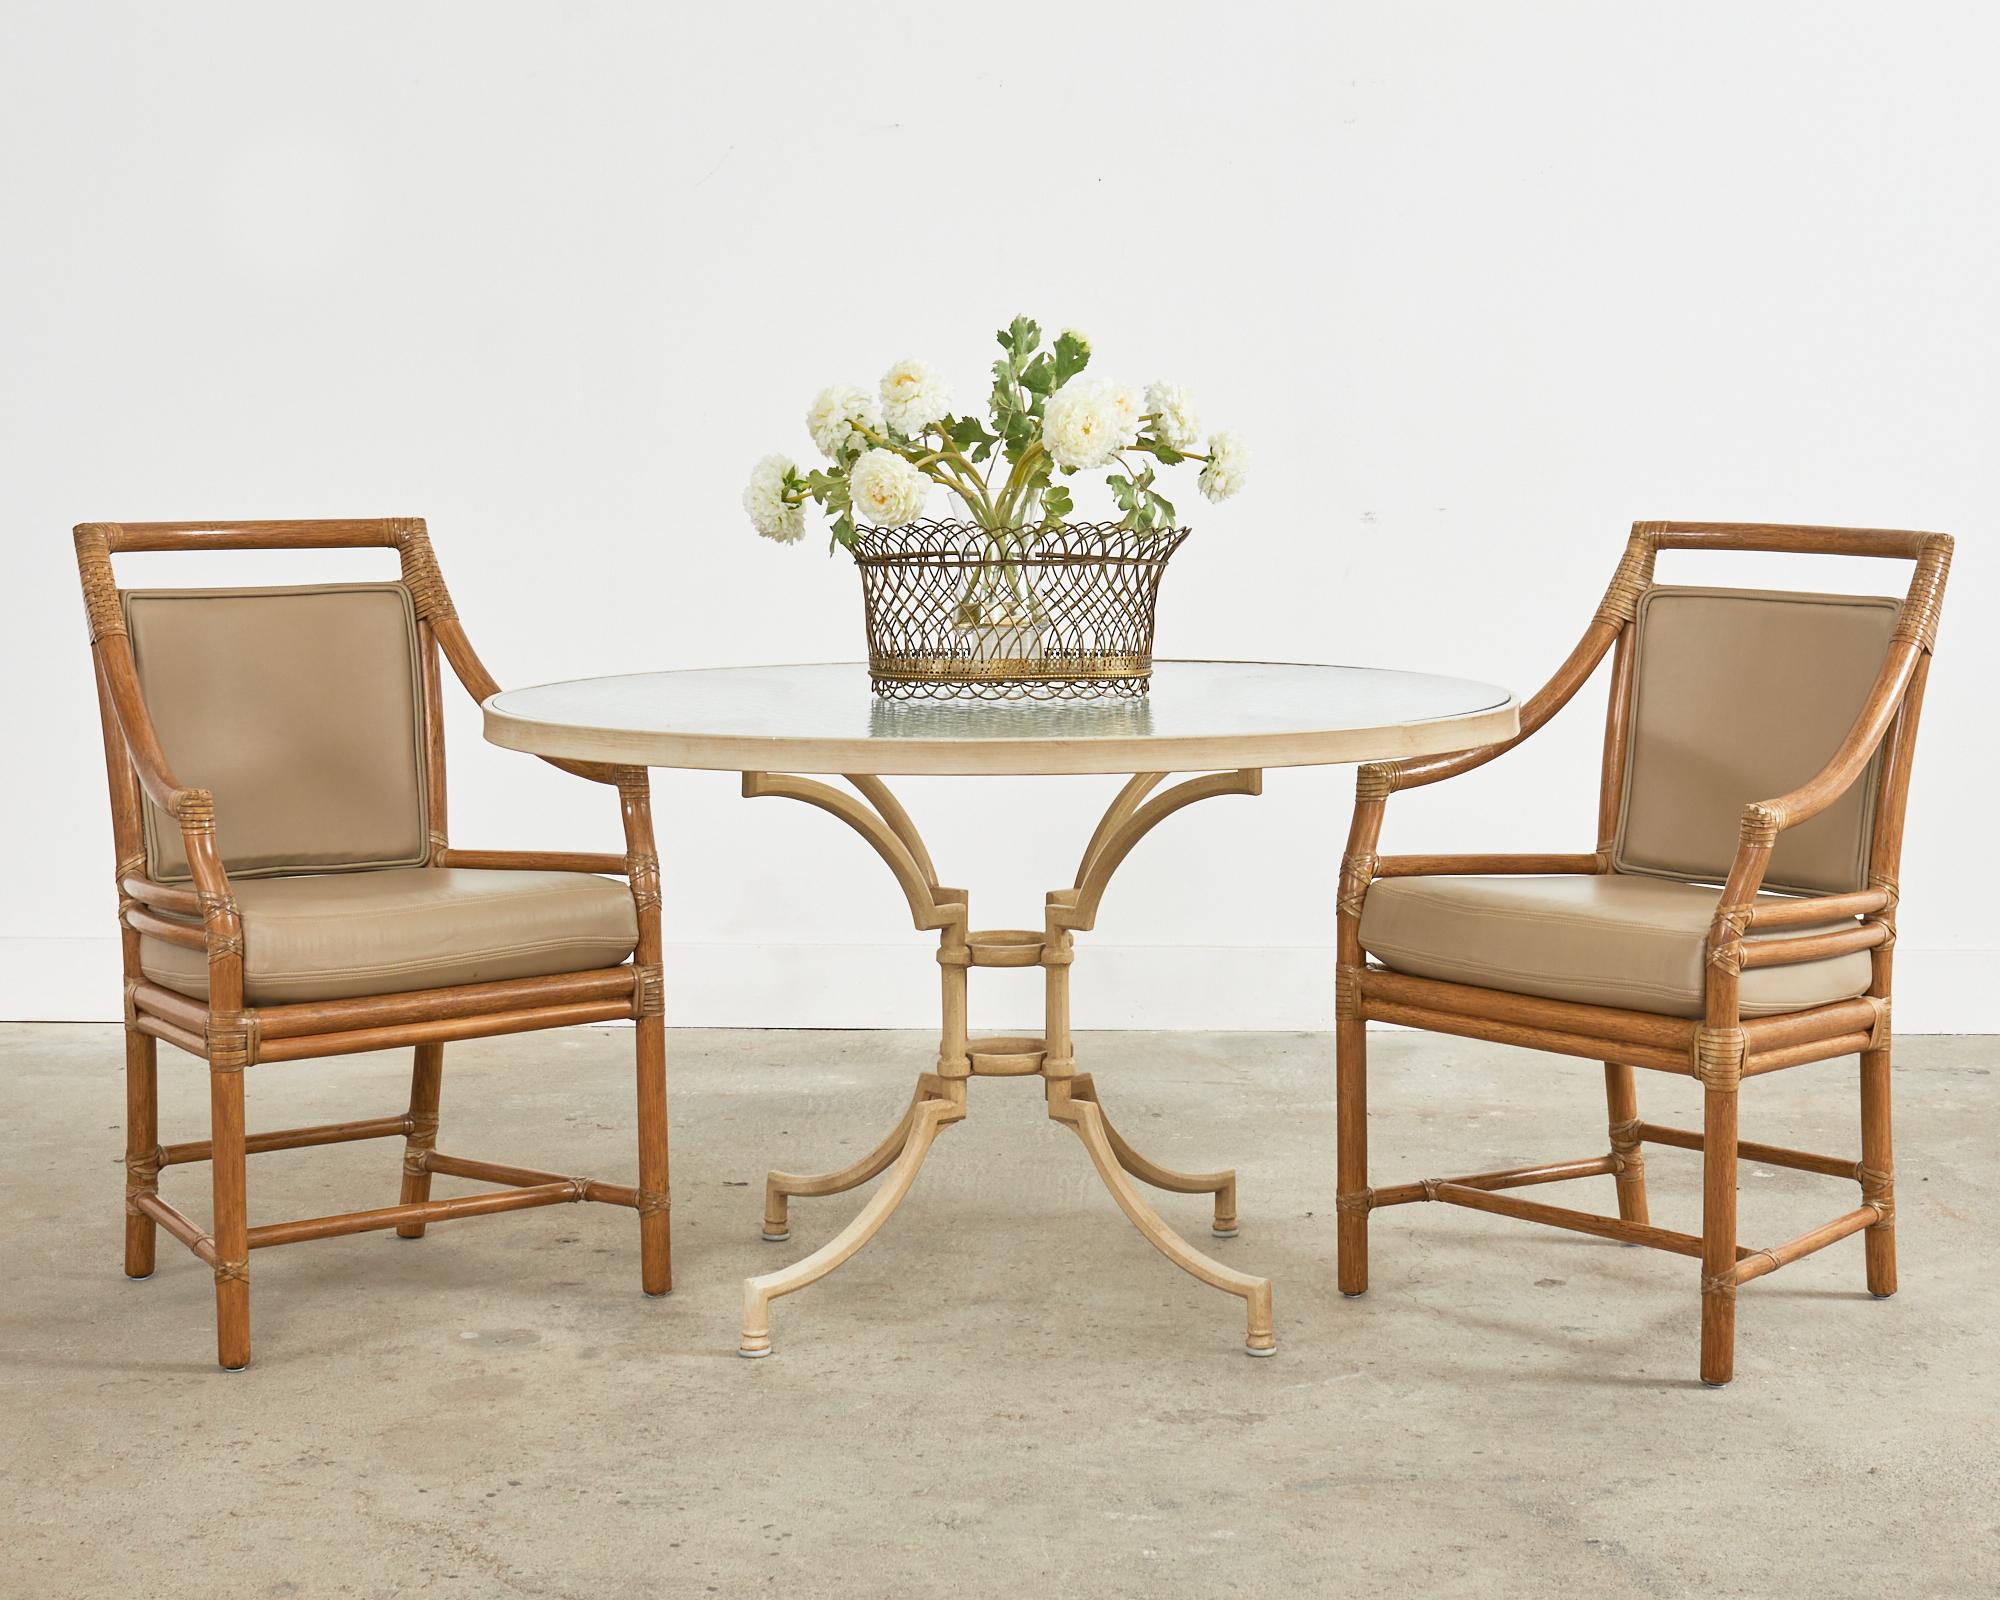 Bespoke set of four iconic rattan dining armchairs made in the California coastal organic modern style by McGuire San Francisco, CA. Model number MCM59B known as target chairs feature a square back with a target shaped splat. The inner circle of the